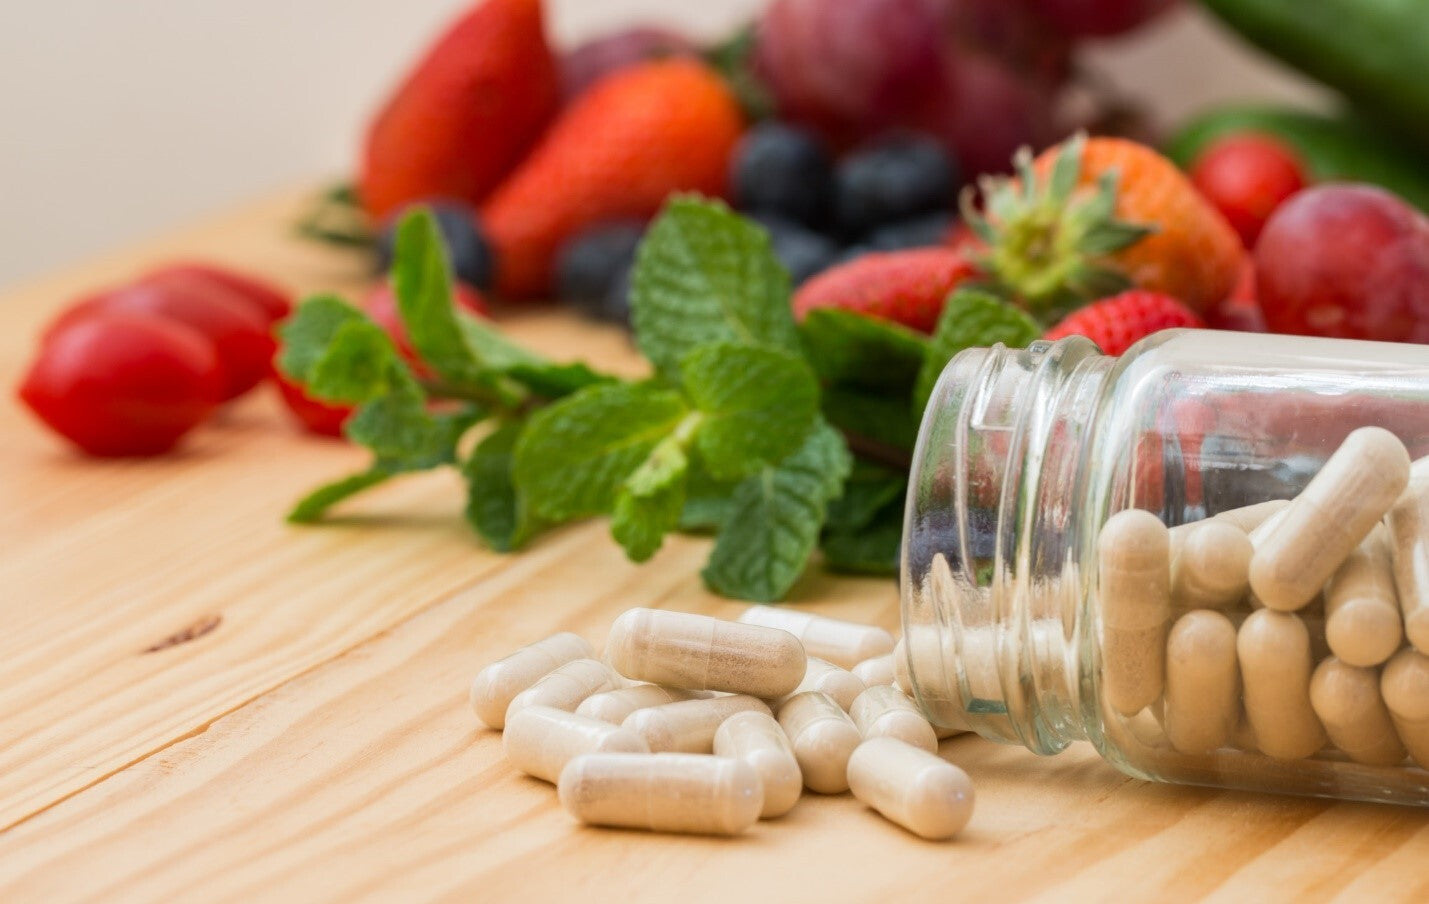 How Safe Are Your Dietary Supplements?